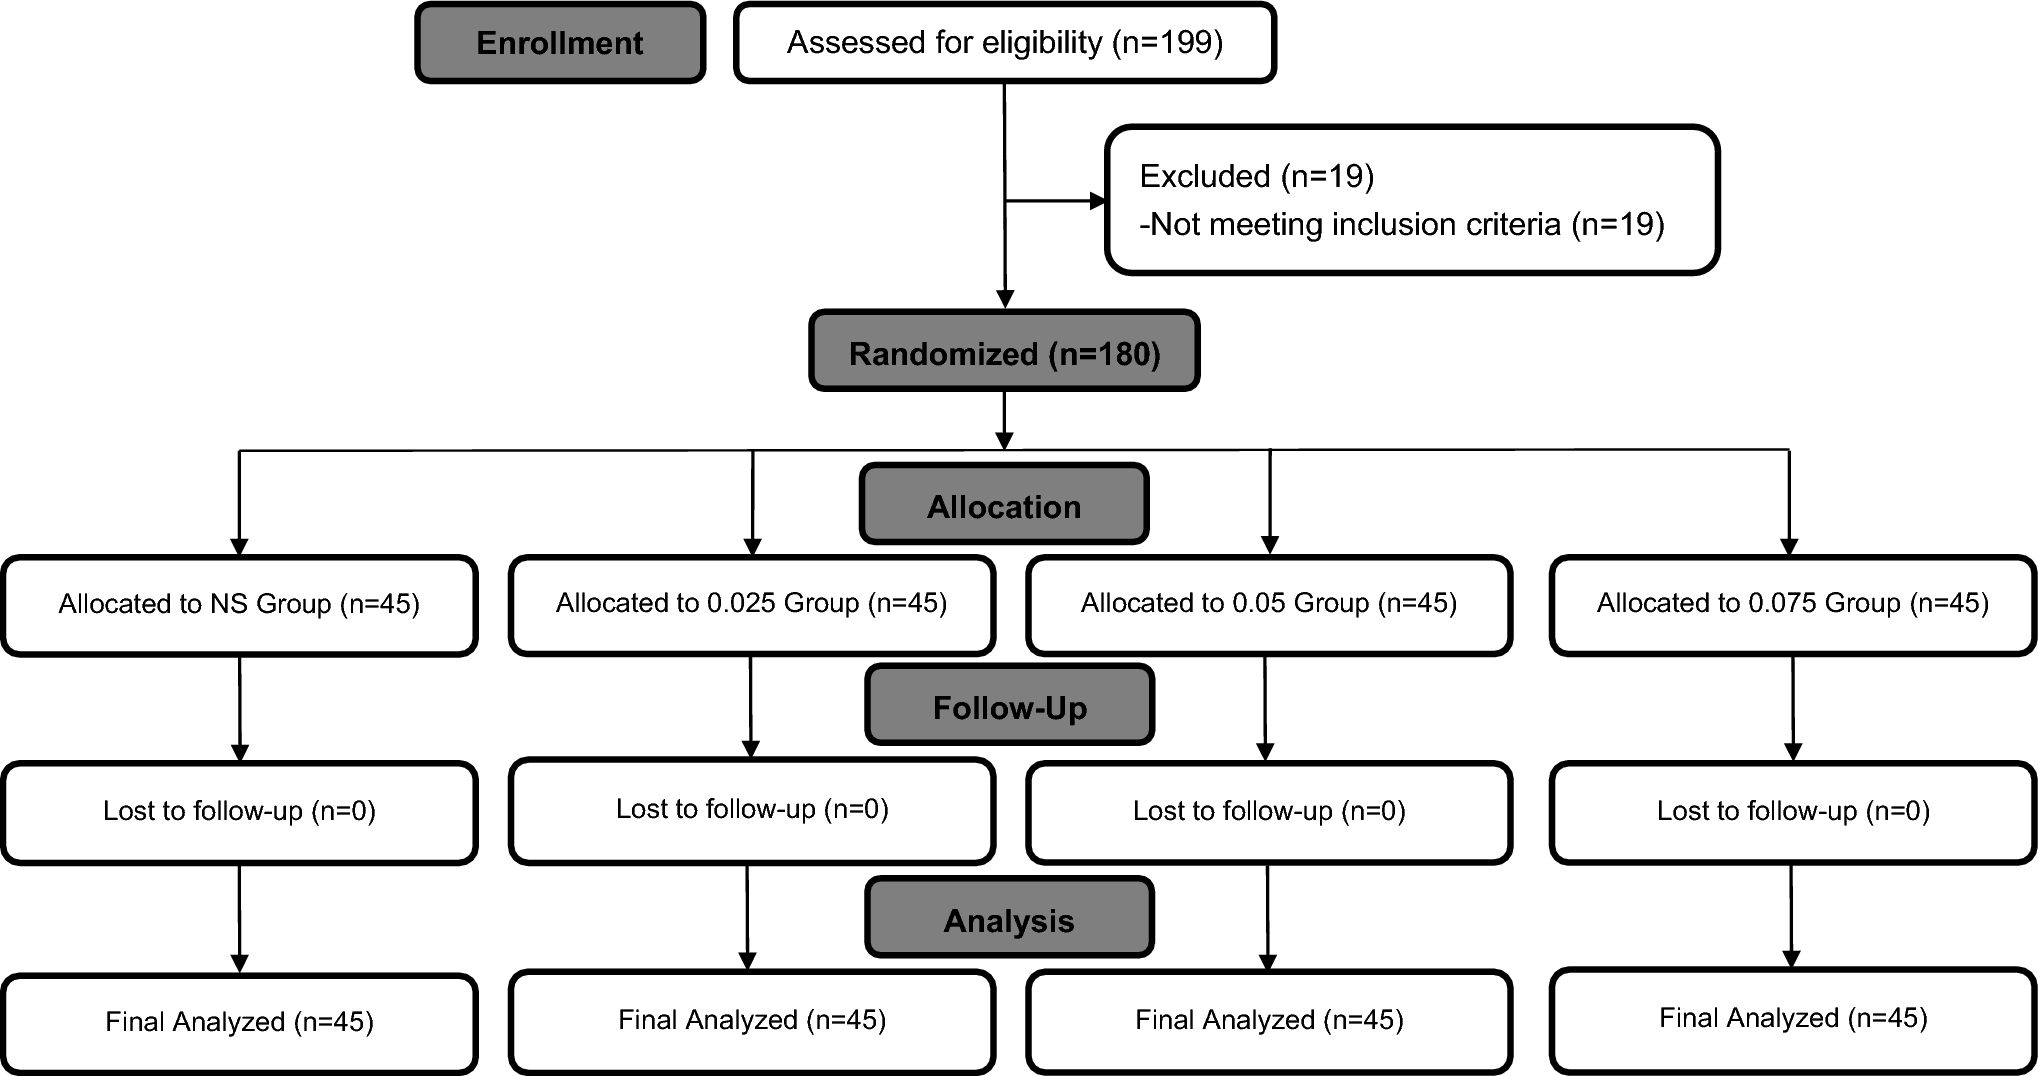 Dose-Response Study of Norepinephrine Infusion for Maternal Hypotension in Preeclamptic Patients Undergoing Cesarean Delivery Under Spinal Anesthesia